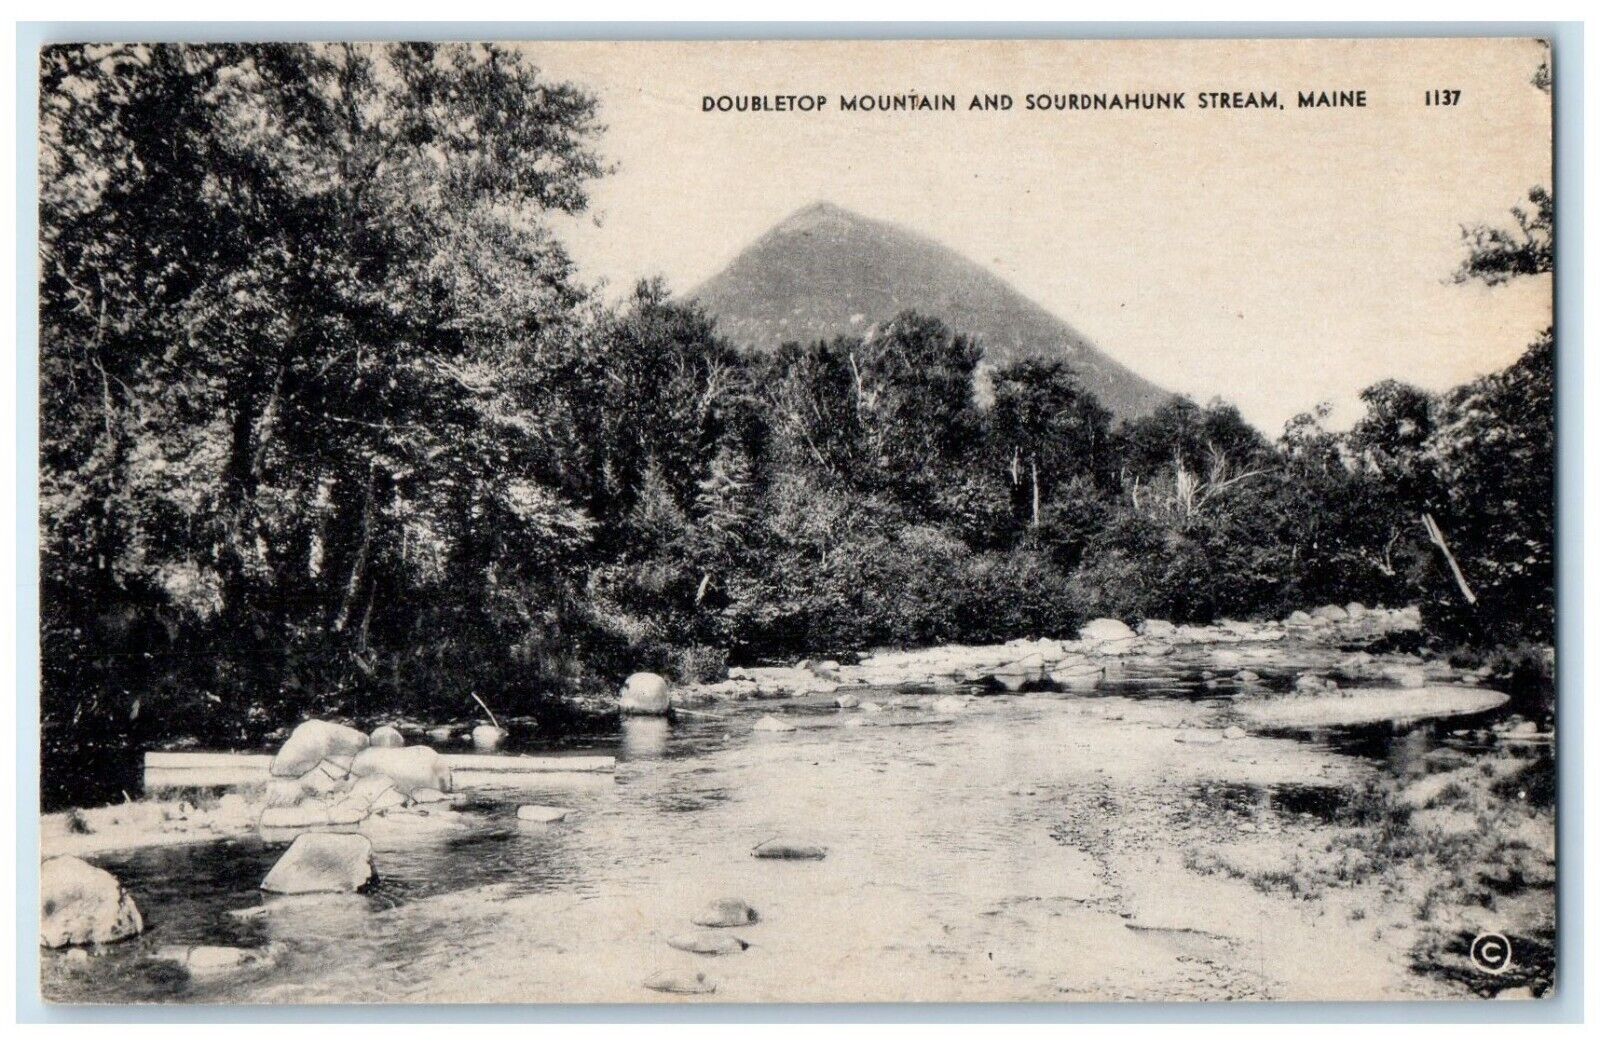 c1940 Doubletop Mountain Sourdnahunk Stream Maine ME Unposted Vintage Postcard